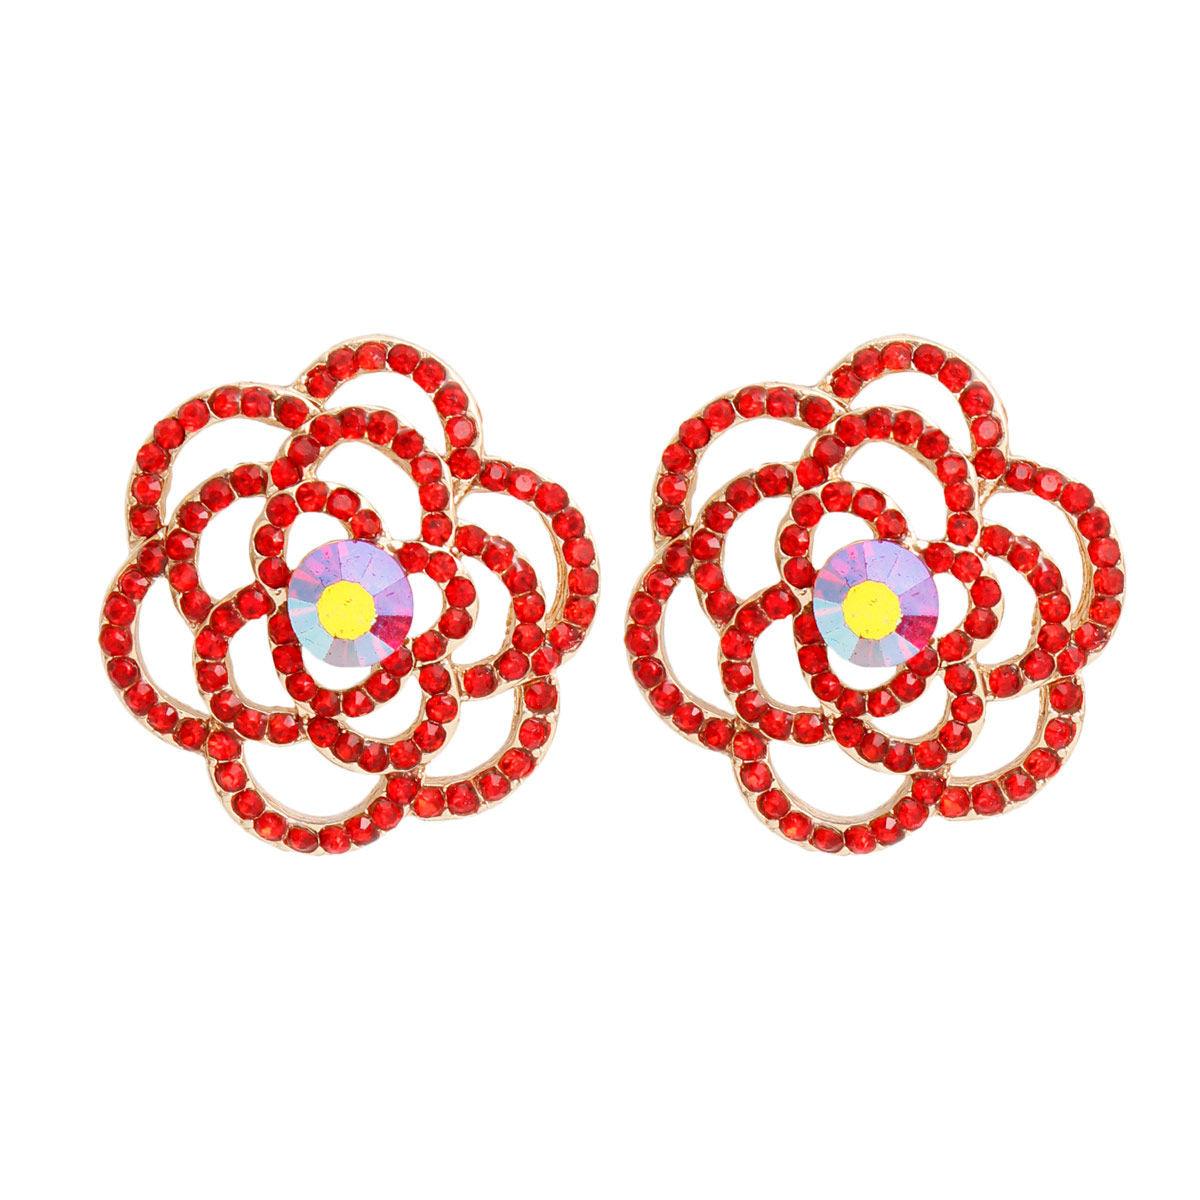 Open Red Rose Earrings: Chic and Contemporary Style